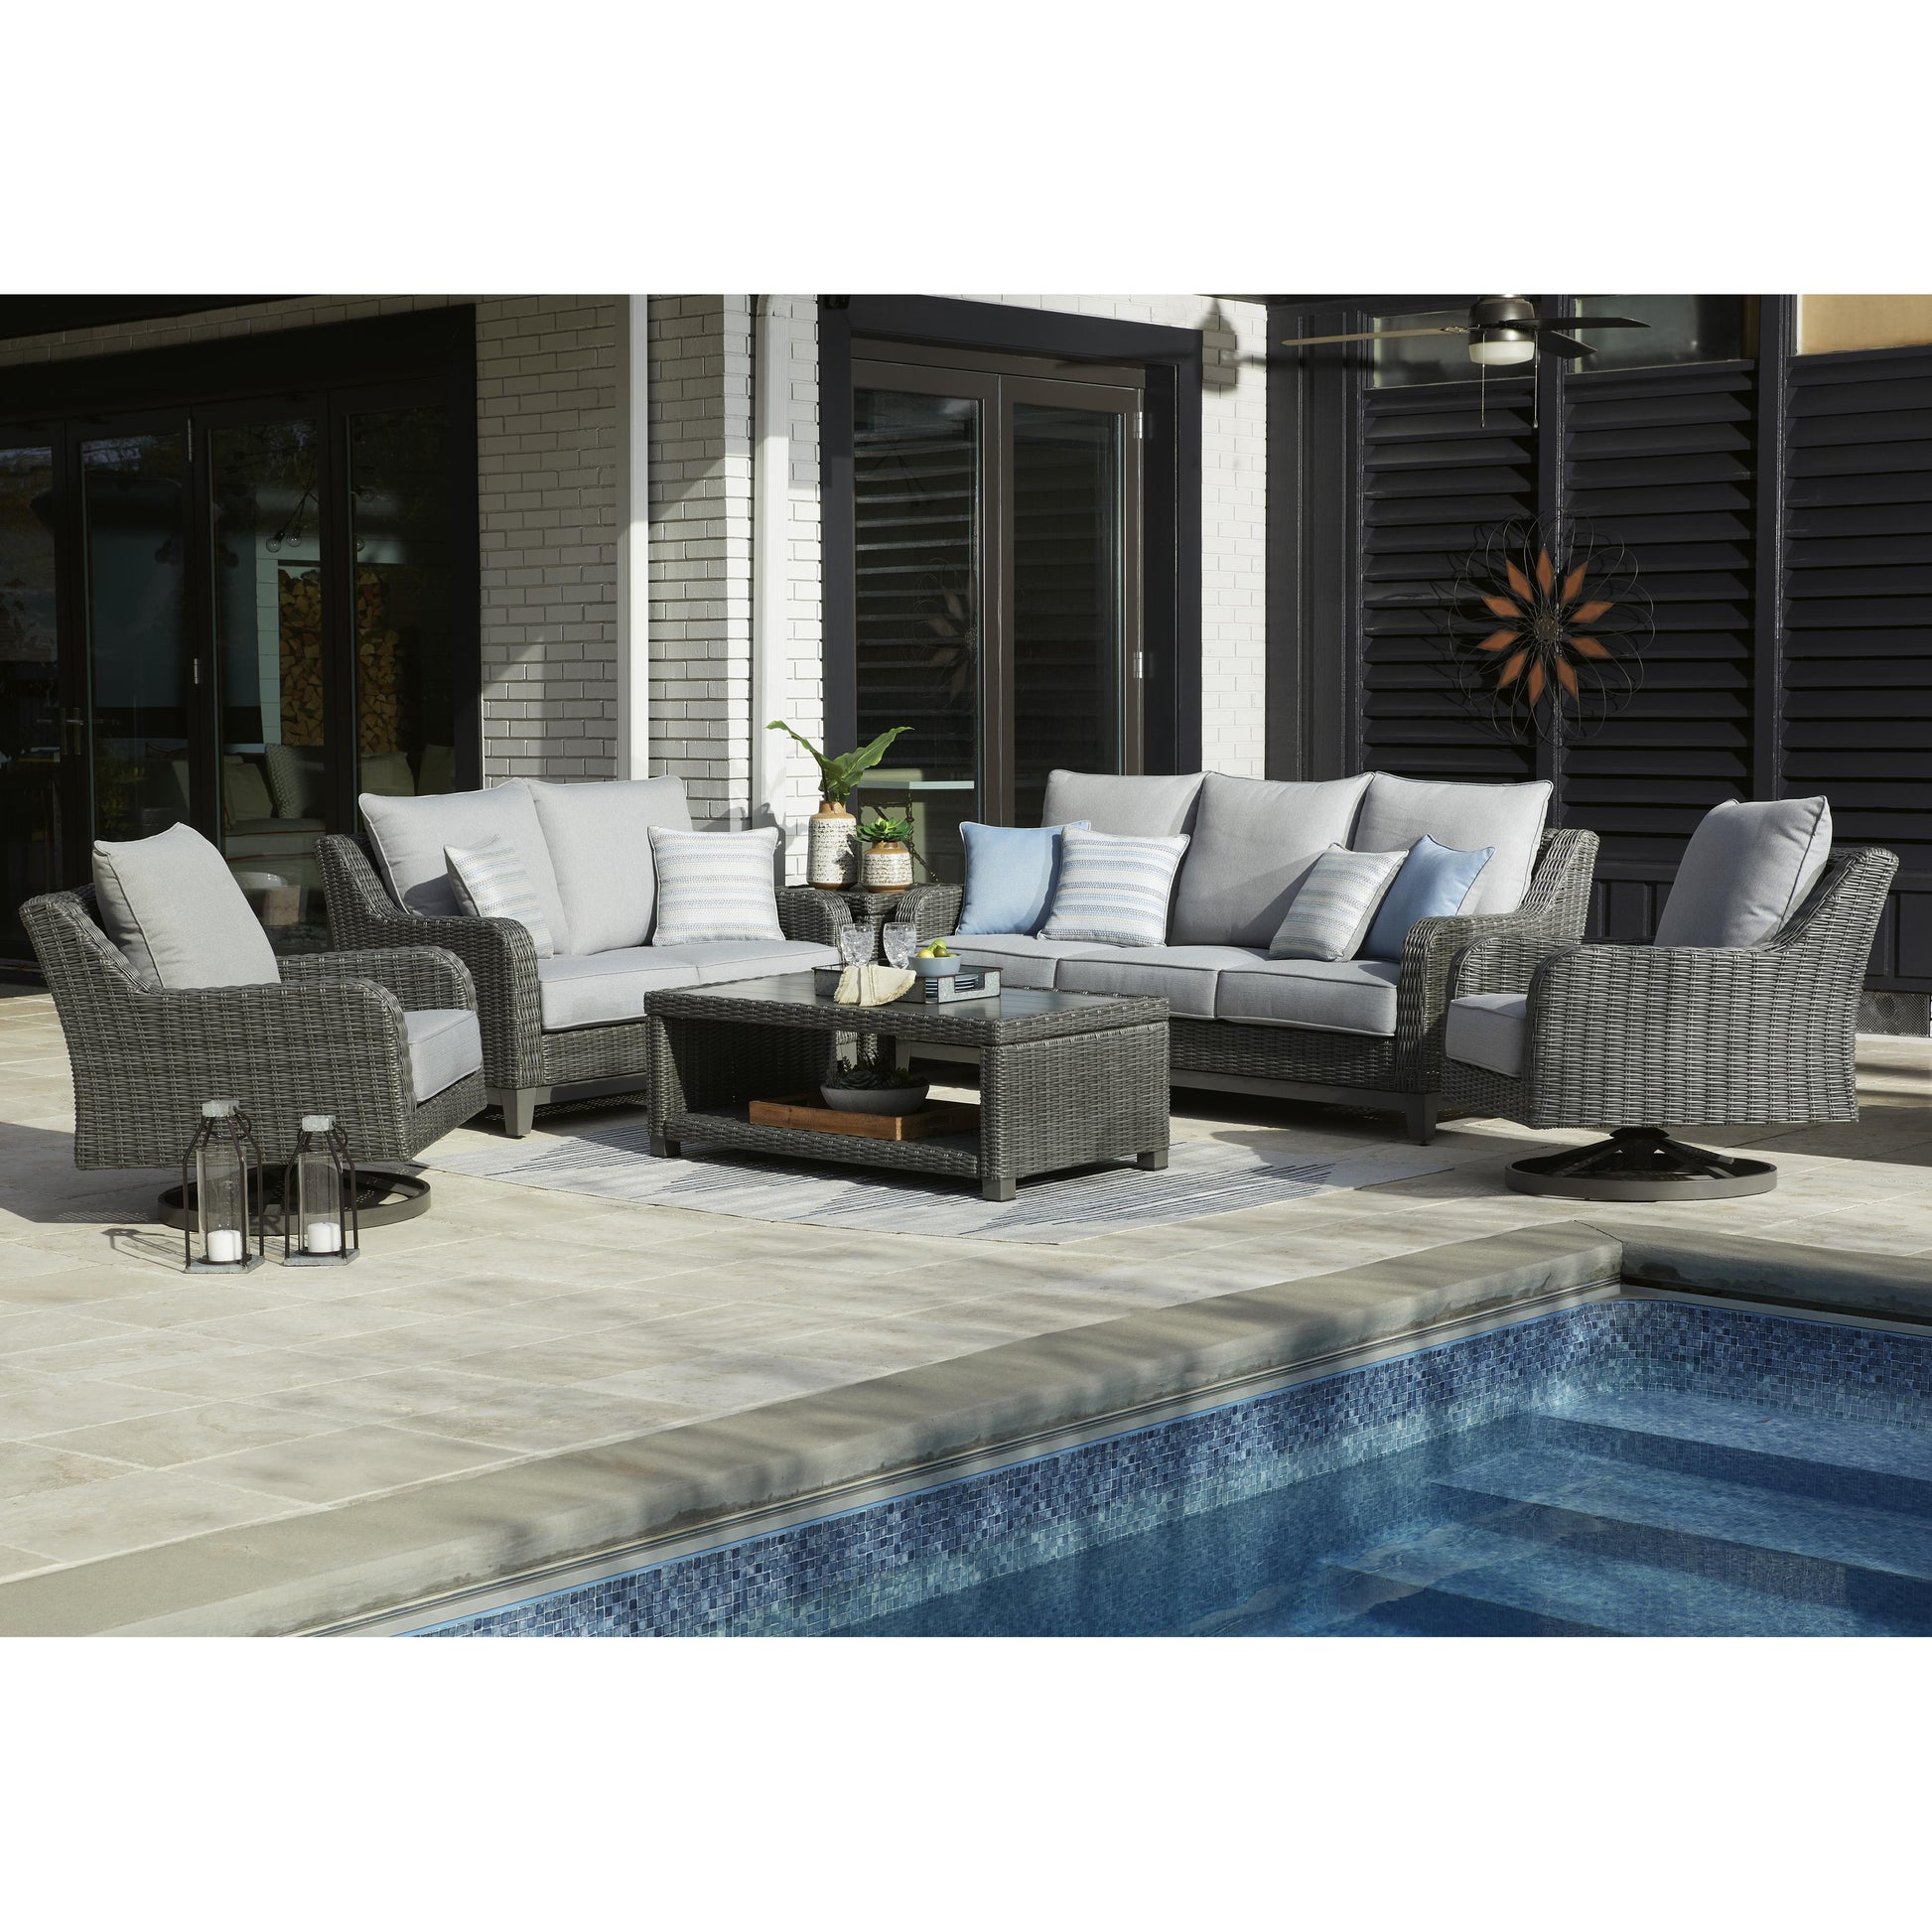 Signature Design by Ashley Outdoor Seating Lounge Chairs P518-821 IMAGE 9